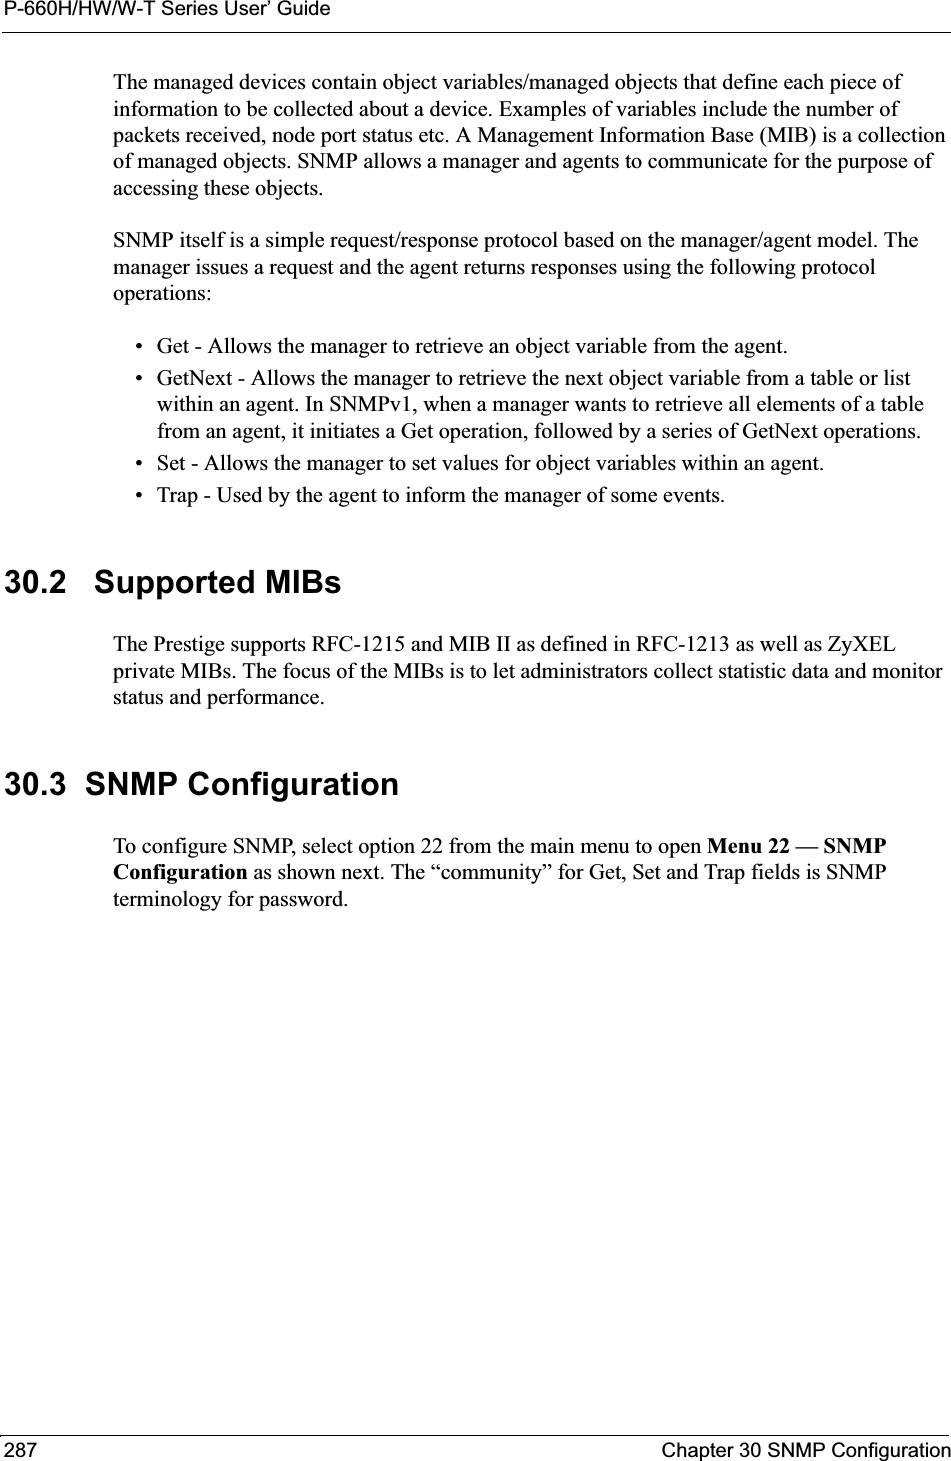 P-660H/HW/W-T Series User’ Guide287 Chapter 30 SNMP ConfigurationThe managed devices contain object variables/managed objects that define each piece of information to be collected about a device. Examples of variables include the number of packets received, node port status etc. A Management Information Base (MIB) is a collection of managed objects. SNMP allows a manager and agents to communicate for the purpose of accessing these objects.SNMP itself is a simple request/response protocol based on the manager/agent model. The manager issues a request and the agent returns responses using the following protocol operations:• Get - Allows the manager to retrieve an object variable from the agent. • GetNext - Allows the manager to retrieve the next object variable from a table or list within an agent. In SNMPv1, when a manager wants to retrieve all elements of a table from an agent, it initiates a Get operation, followed by a series of GetNext operations. • Set - Allows the manager to set values for object variables within an agent. • Trap - Used by the agent to inform the manager of some events.30.2   Supported MIBsThe Prestige supports RFC-1215 and MIB II as defined in RFC-1213 as well as ZyXEL private MIBs. The focus of the MIBs is to let administrators collect statistic data and monitor status and performance.30.3  SNMP ConfigurationTo configure SNMP, select option 22 from the main menu to open Menu 22 — SNMP Configuration as shown next. The “community” for Get, Set and Trap fields is SNMP terminology for password.